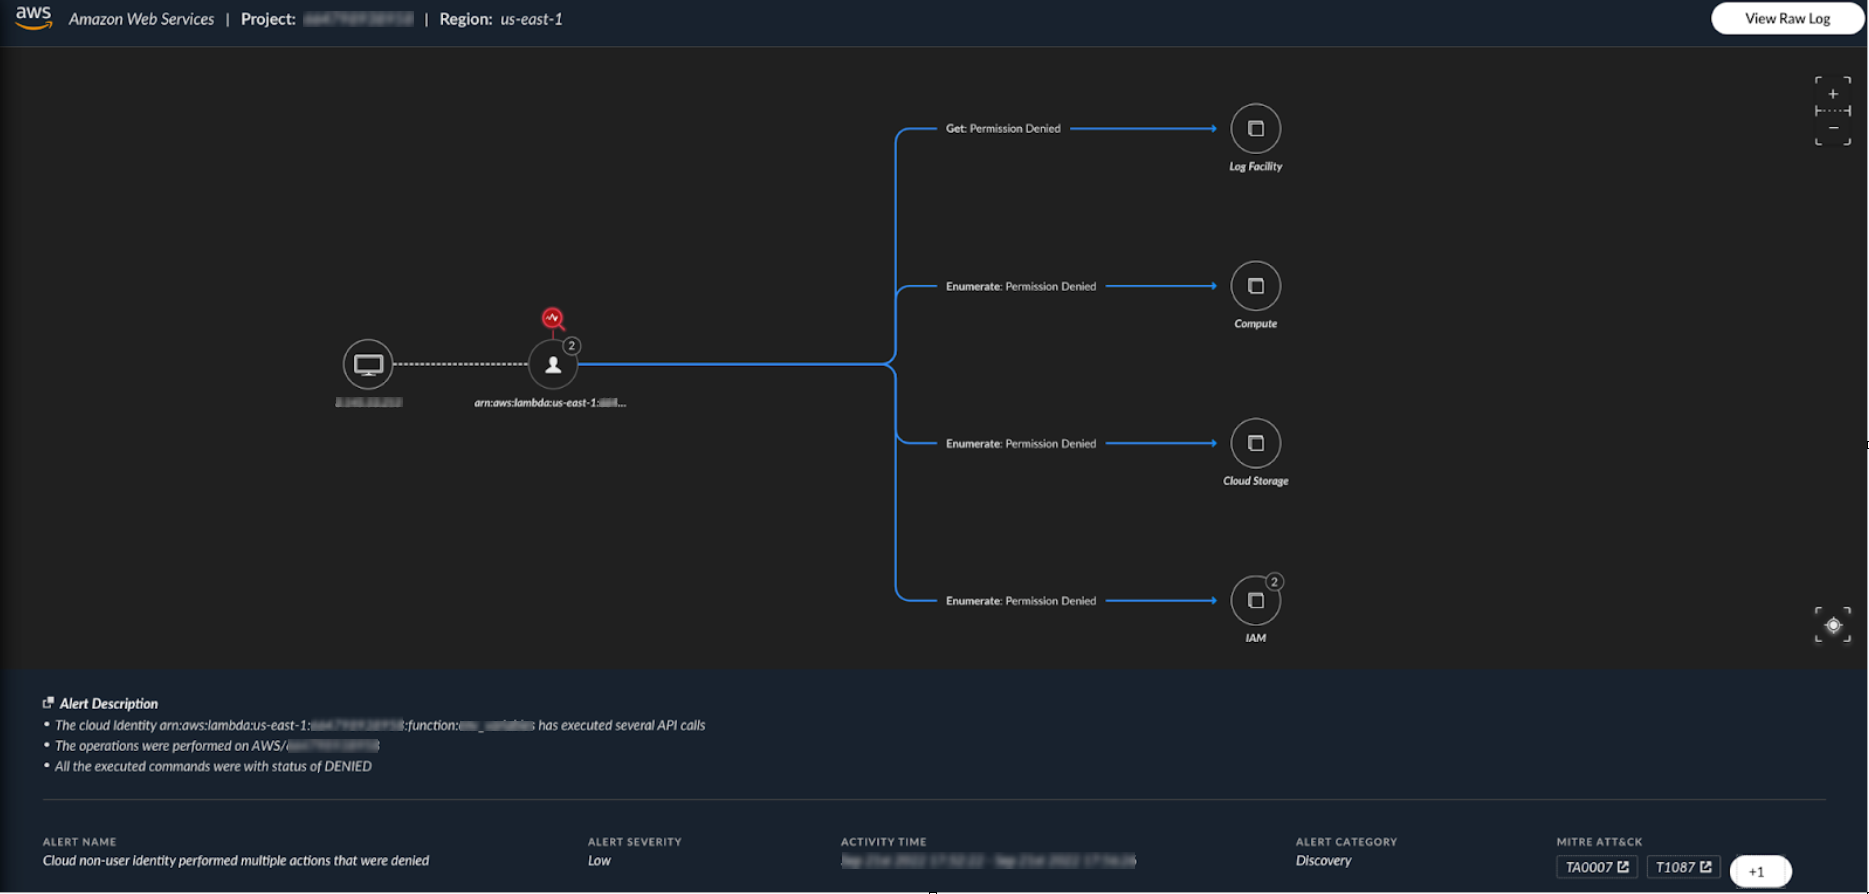 Image 1 is a screenshot of Amazon Web Services showing a branch diagram of an attacker impersonating a Lambda function by stealing the Lambda’s token inside the cloud environment.